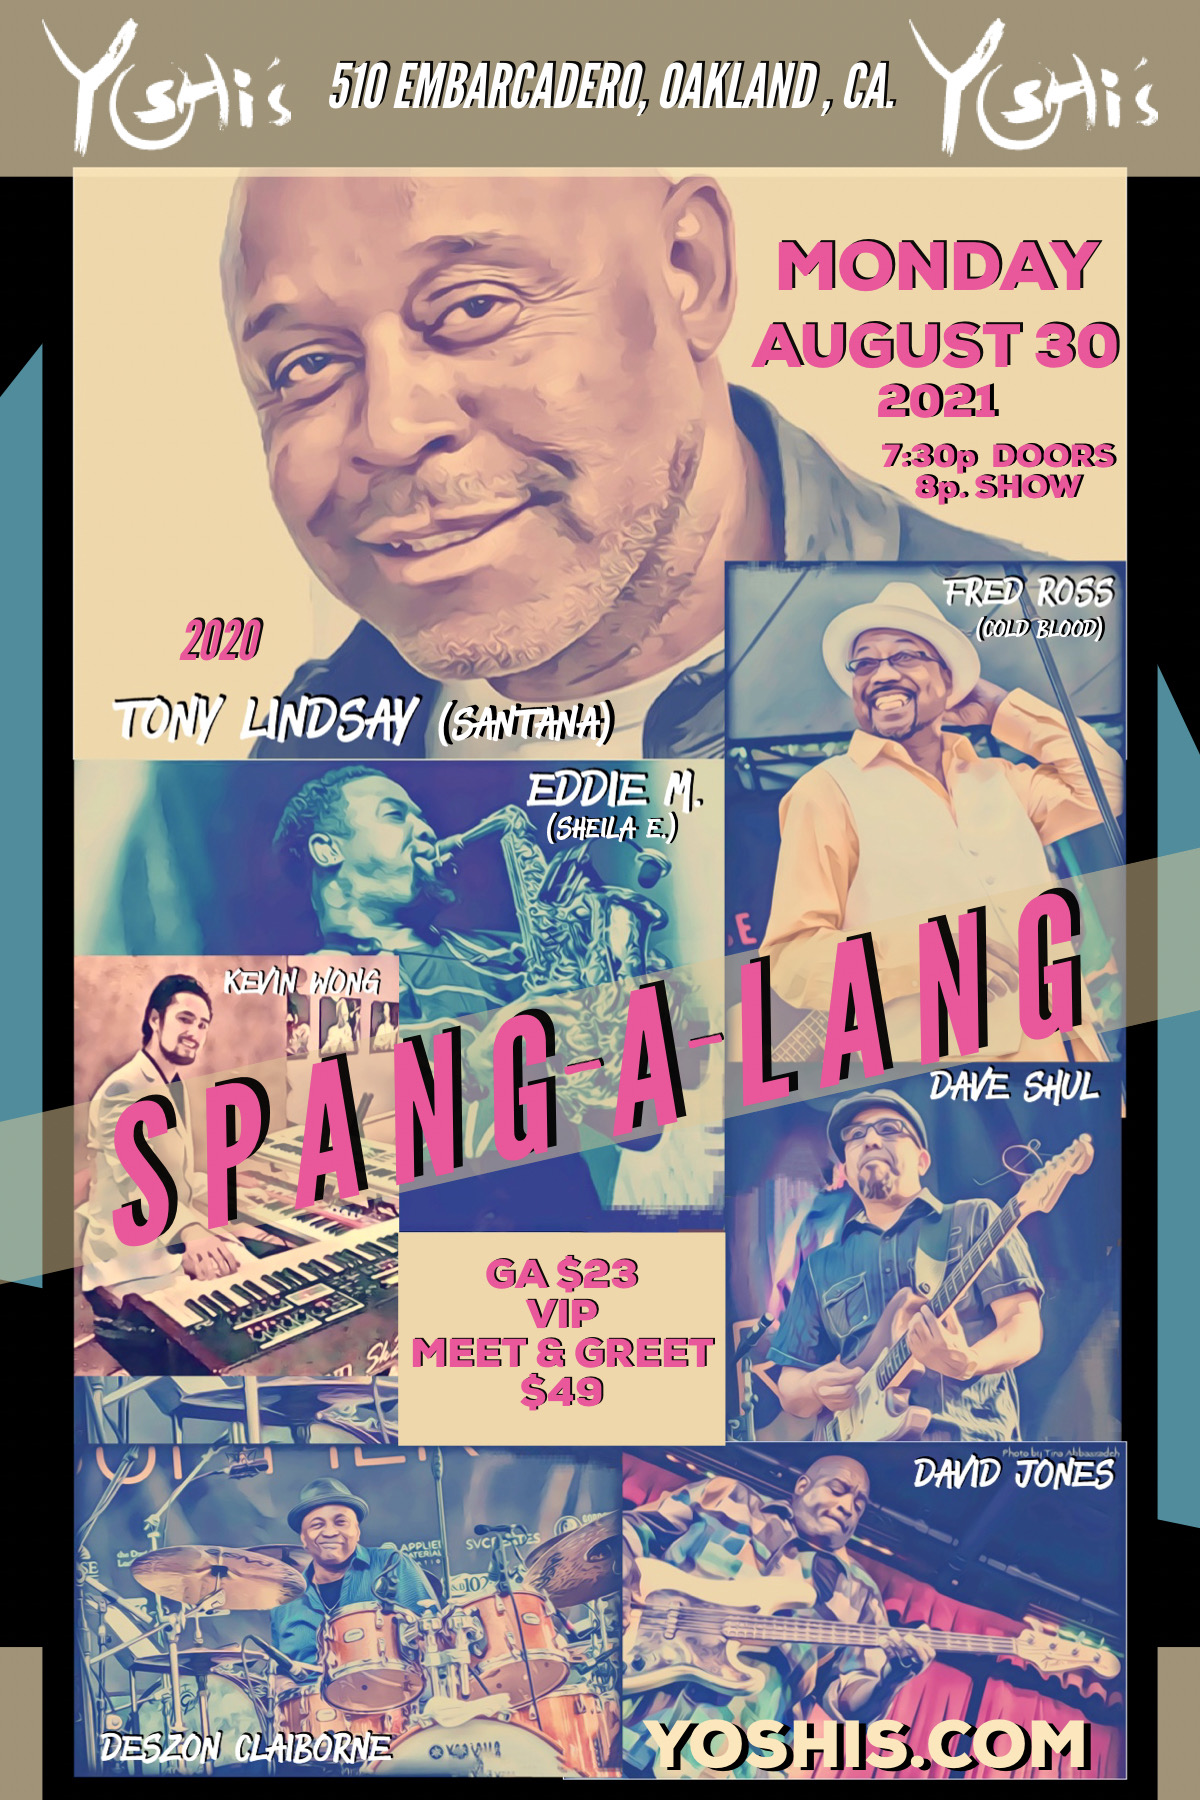 Image for SPANGALANG FEAT. TONY LINDSAY, EDDIE MINIFIELD, FRED ROSS, & MORE